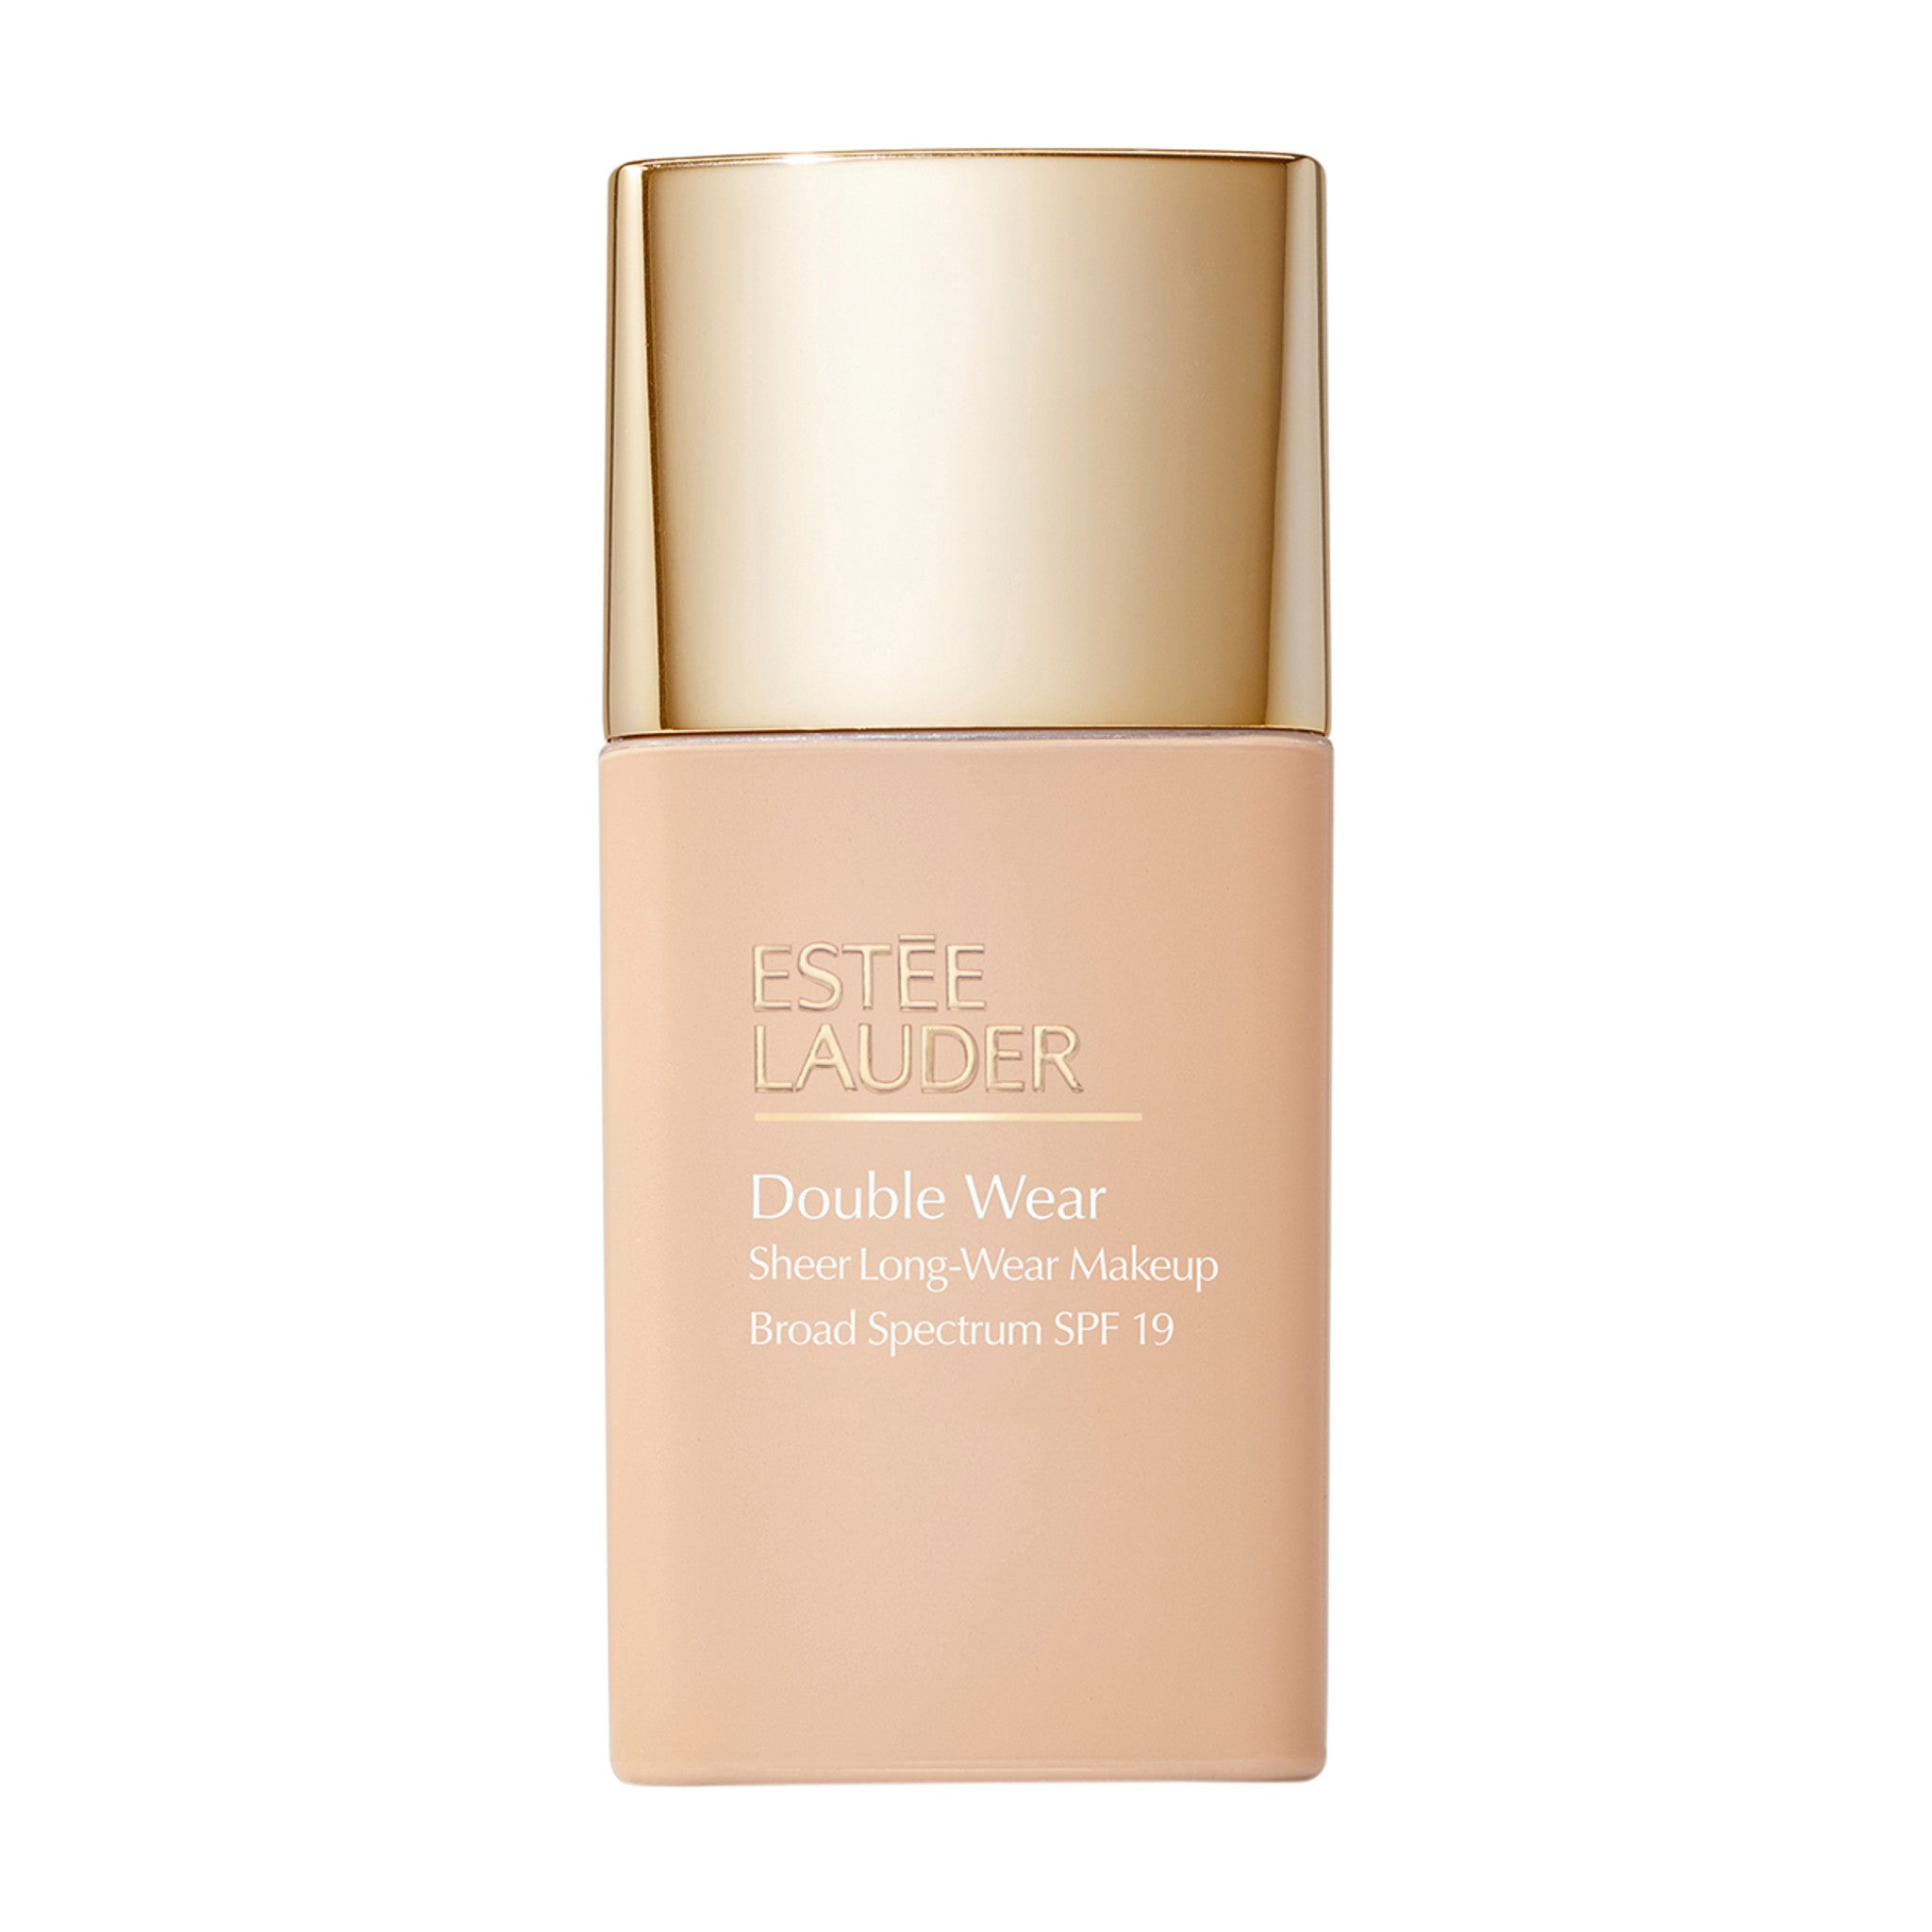 Estée Lauder Double Wear Sheer Long-Wear Foundation Color/Shade variant: 1N2 Ecru main image. This product is for light neutral pink complexions